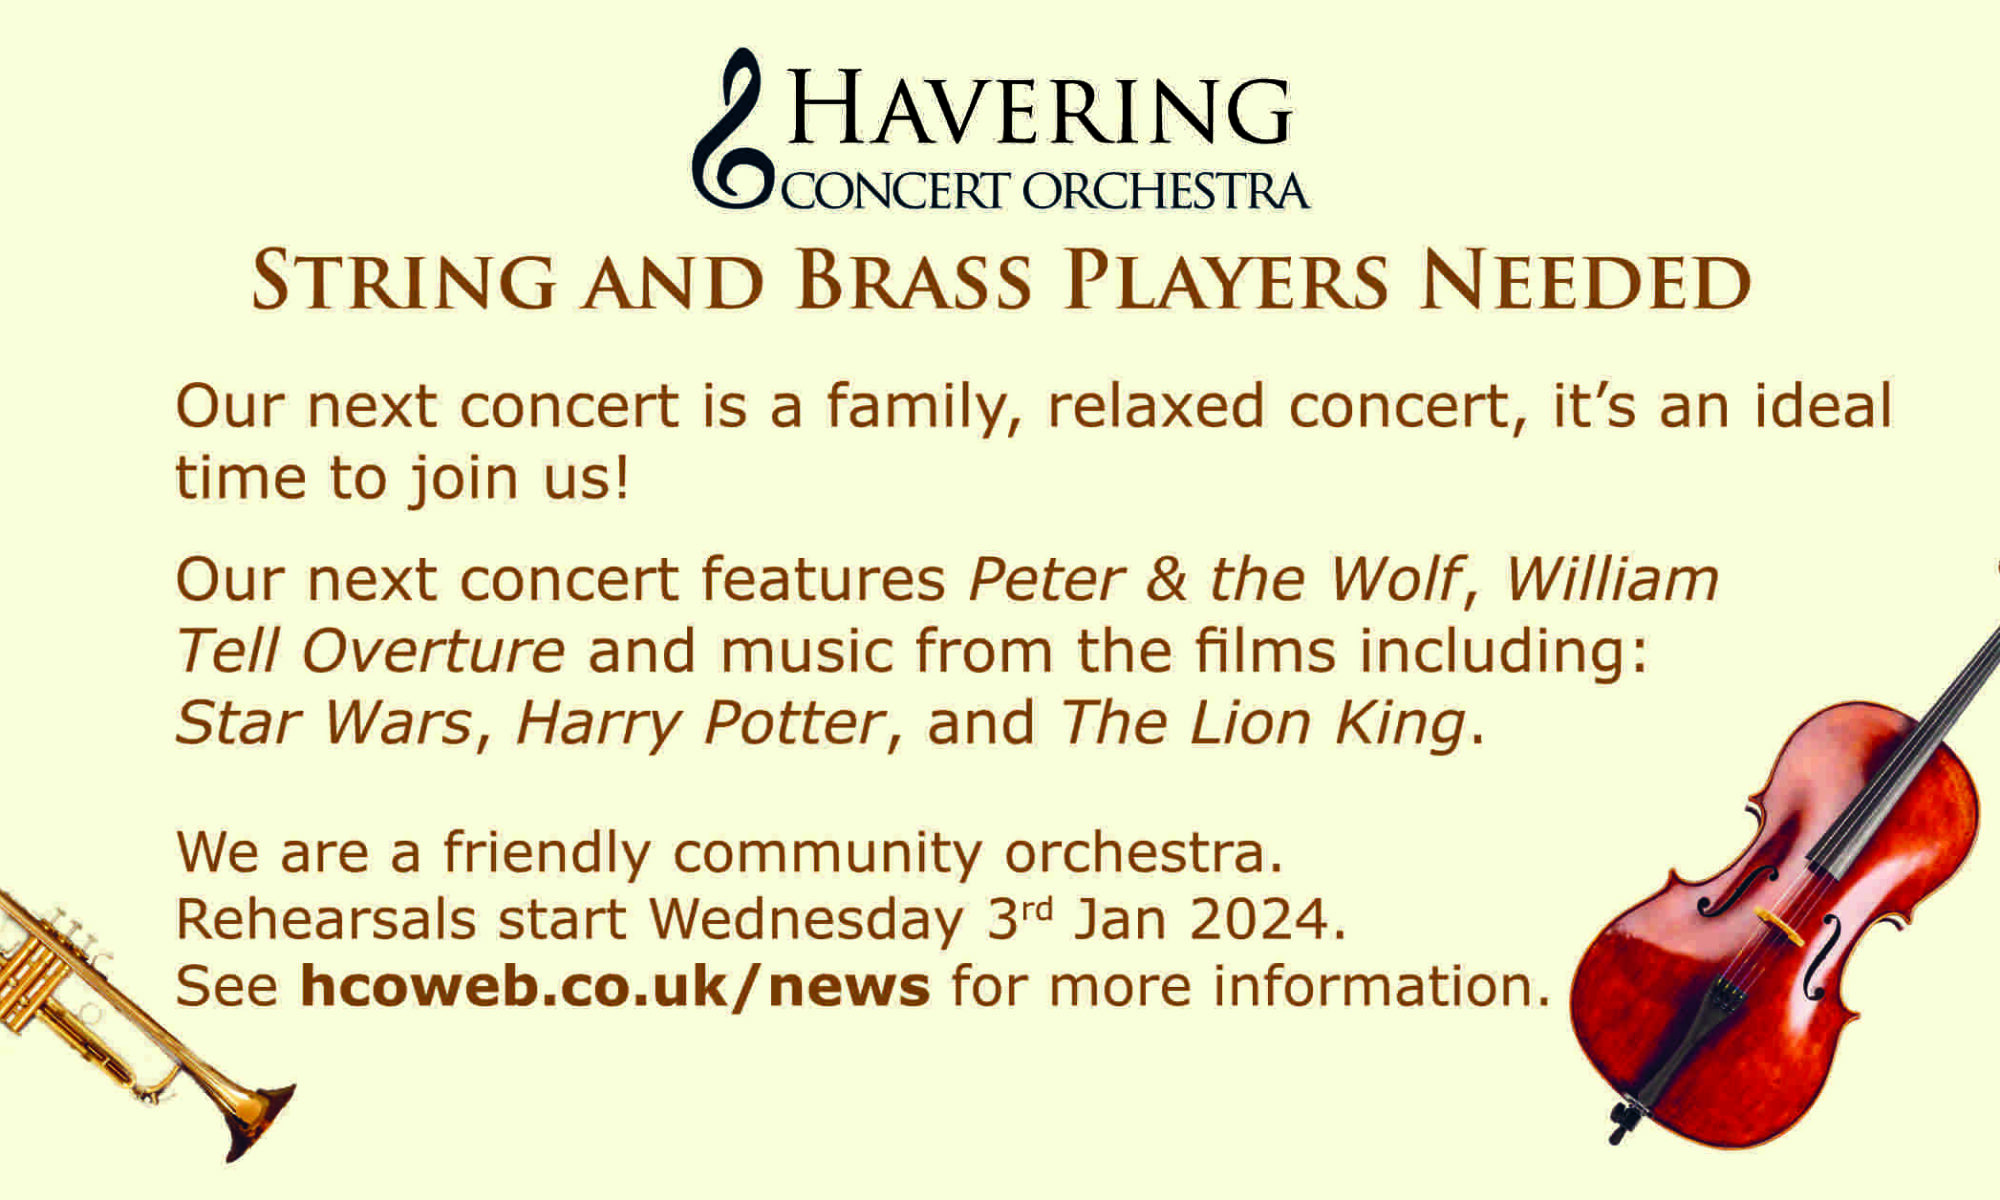 String and brass players wanted.